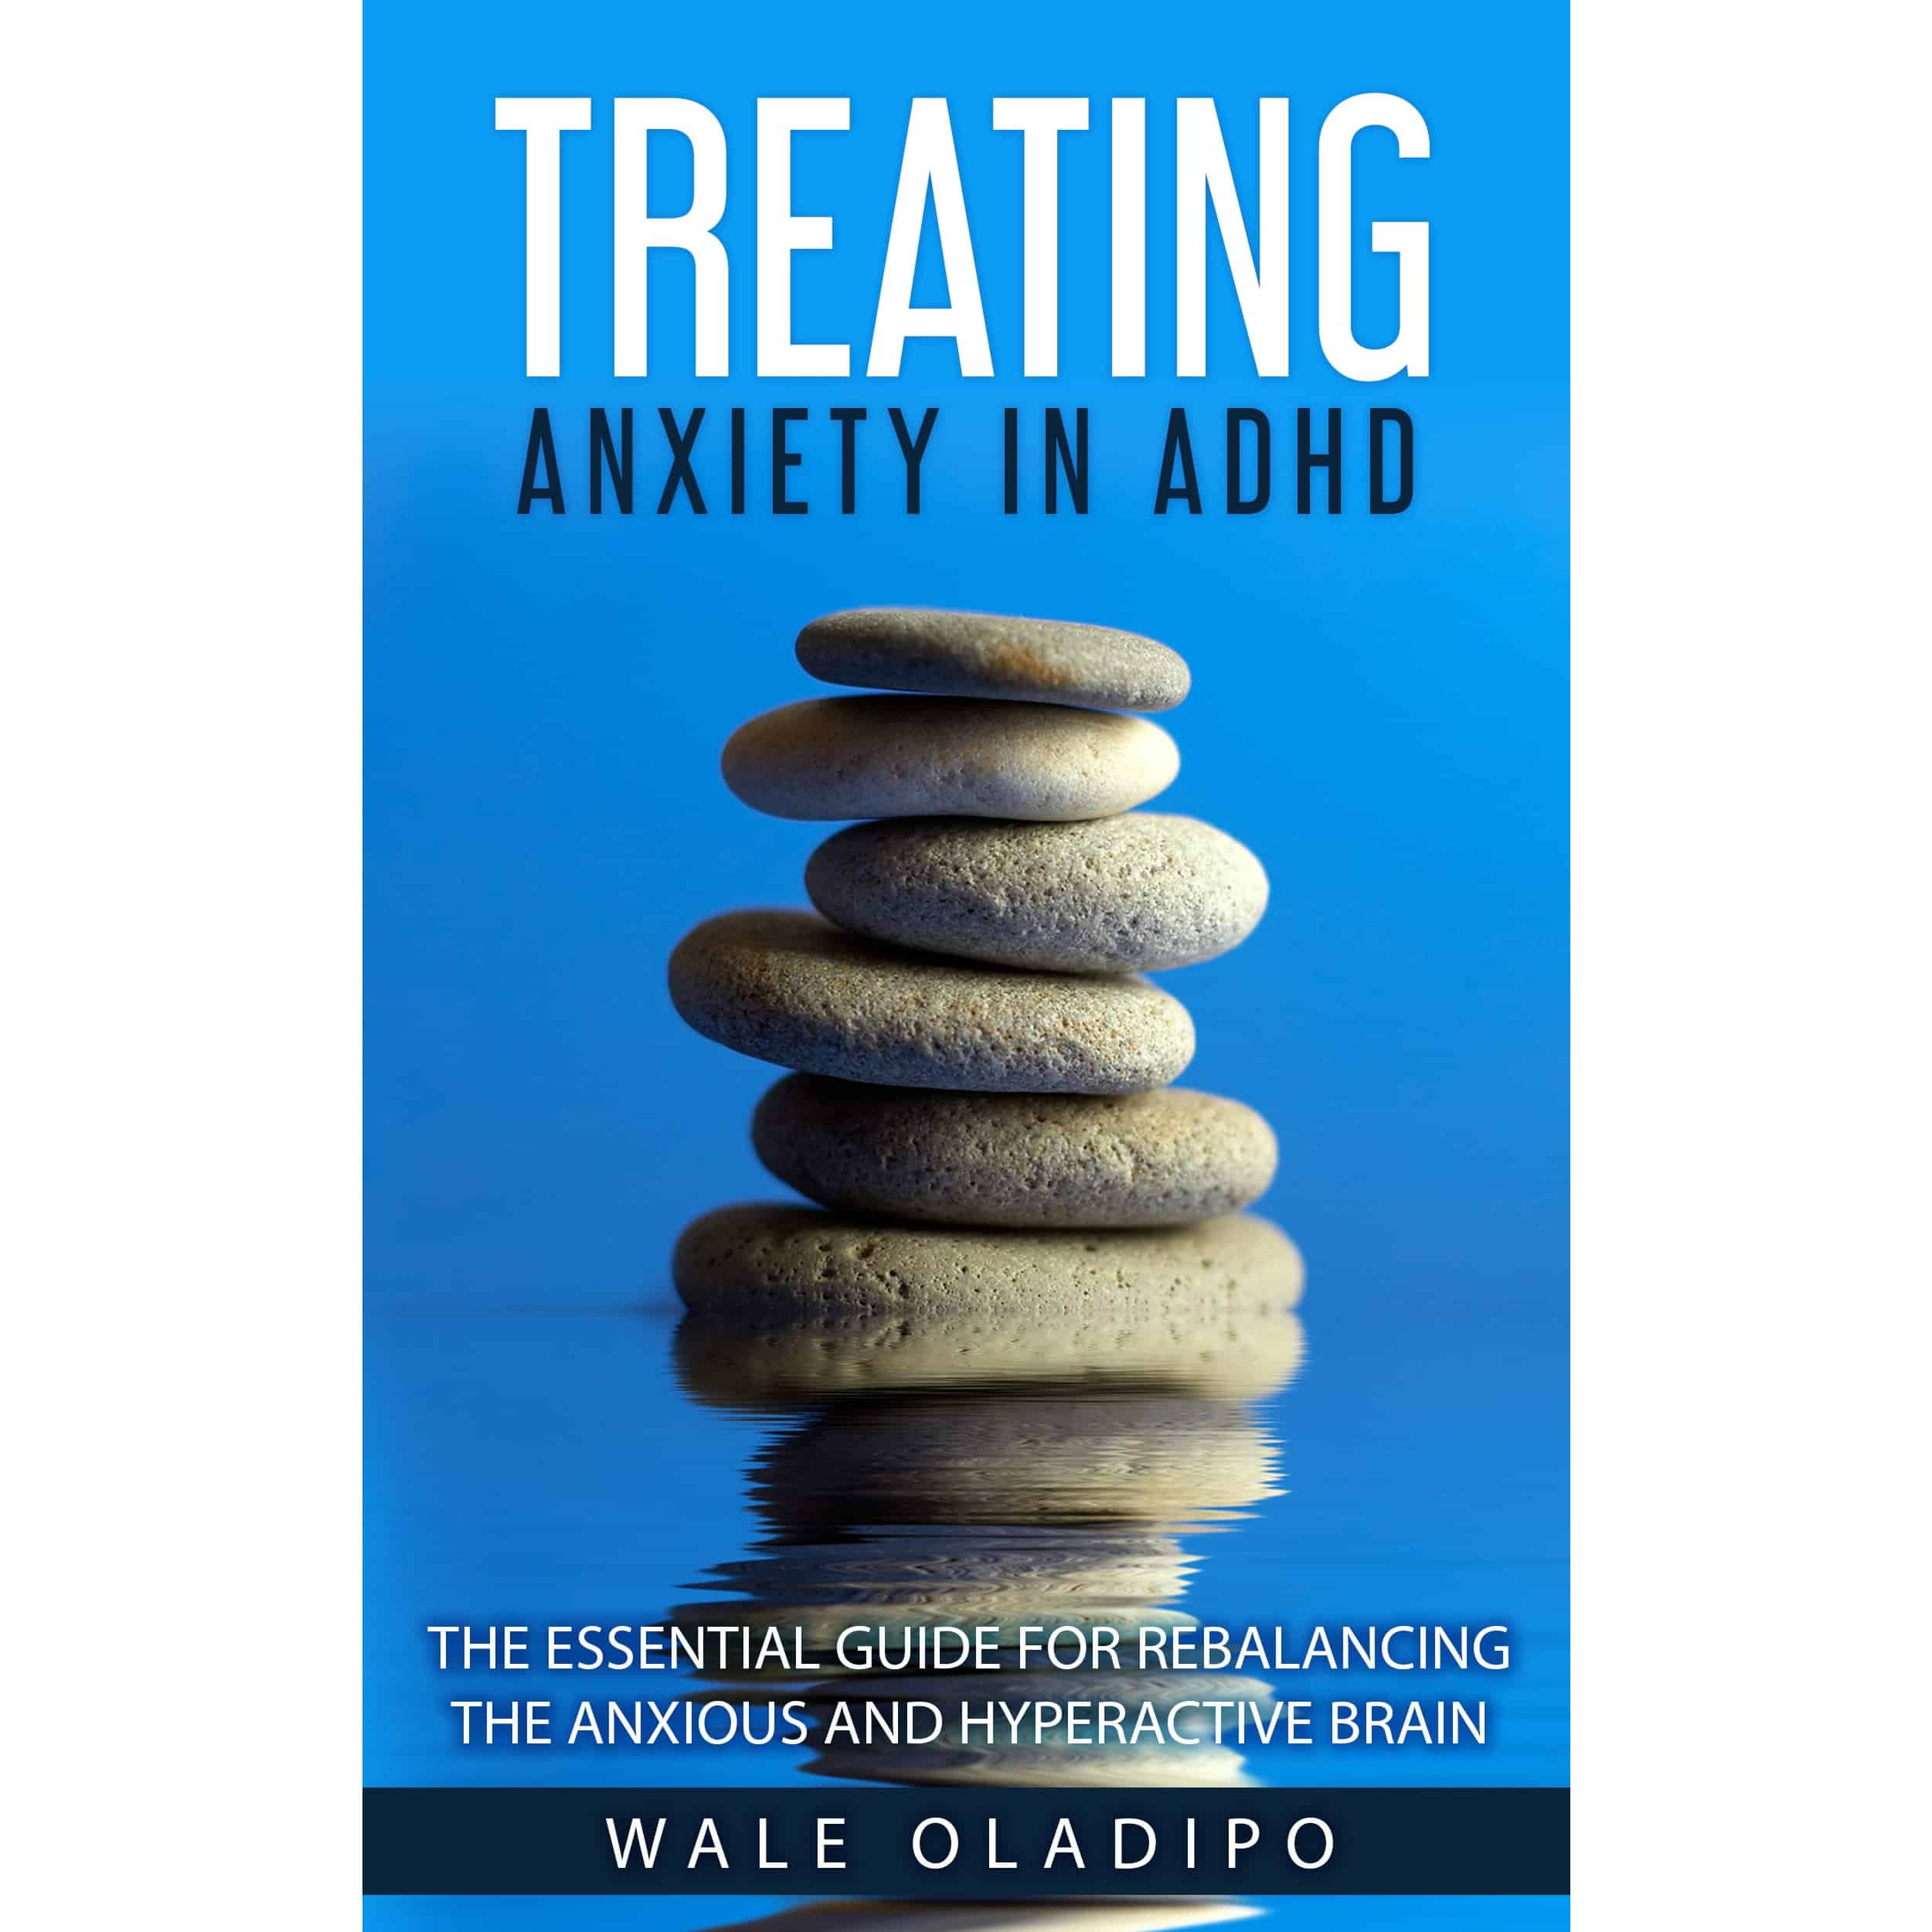 Treating Anxiety In ADHD